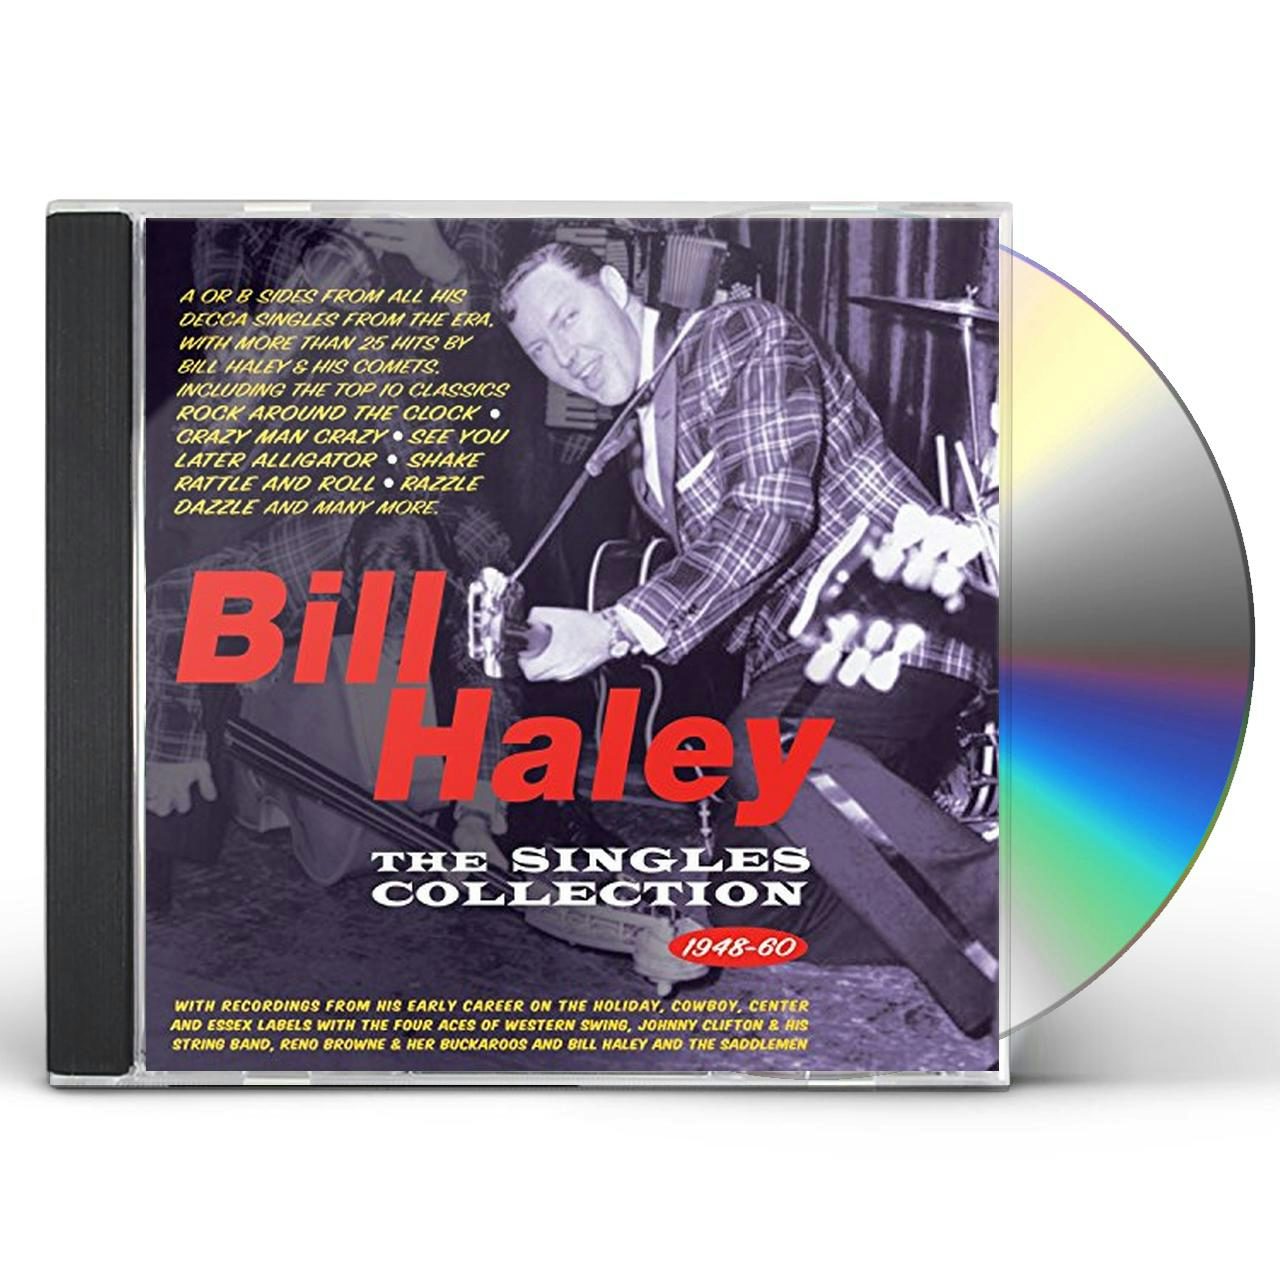 Bill Haley SINGLES COLLECTION 1948-60 CD